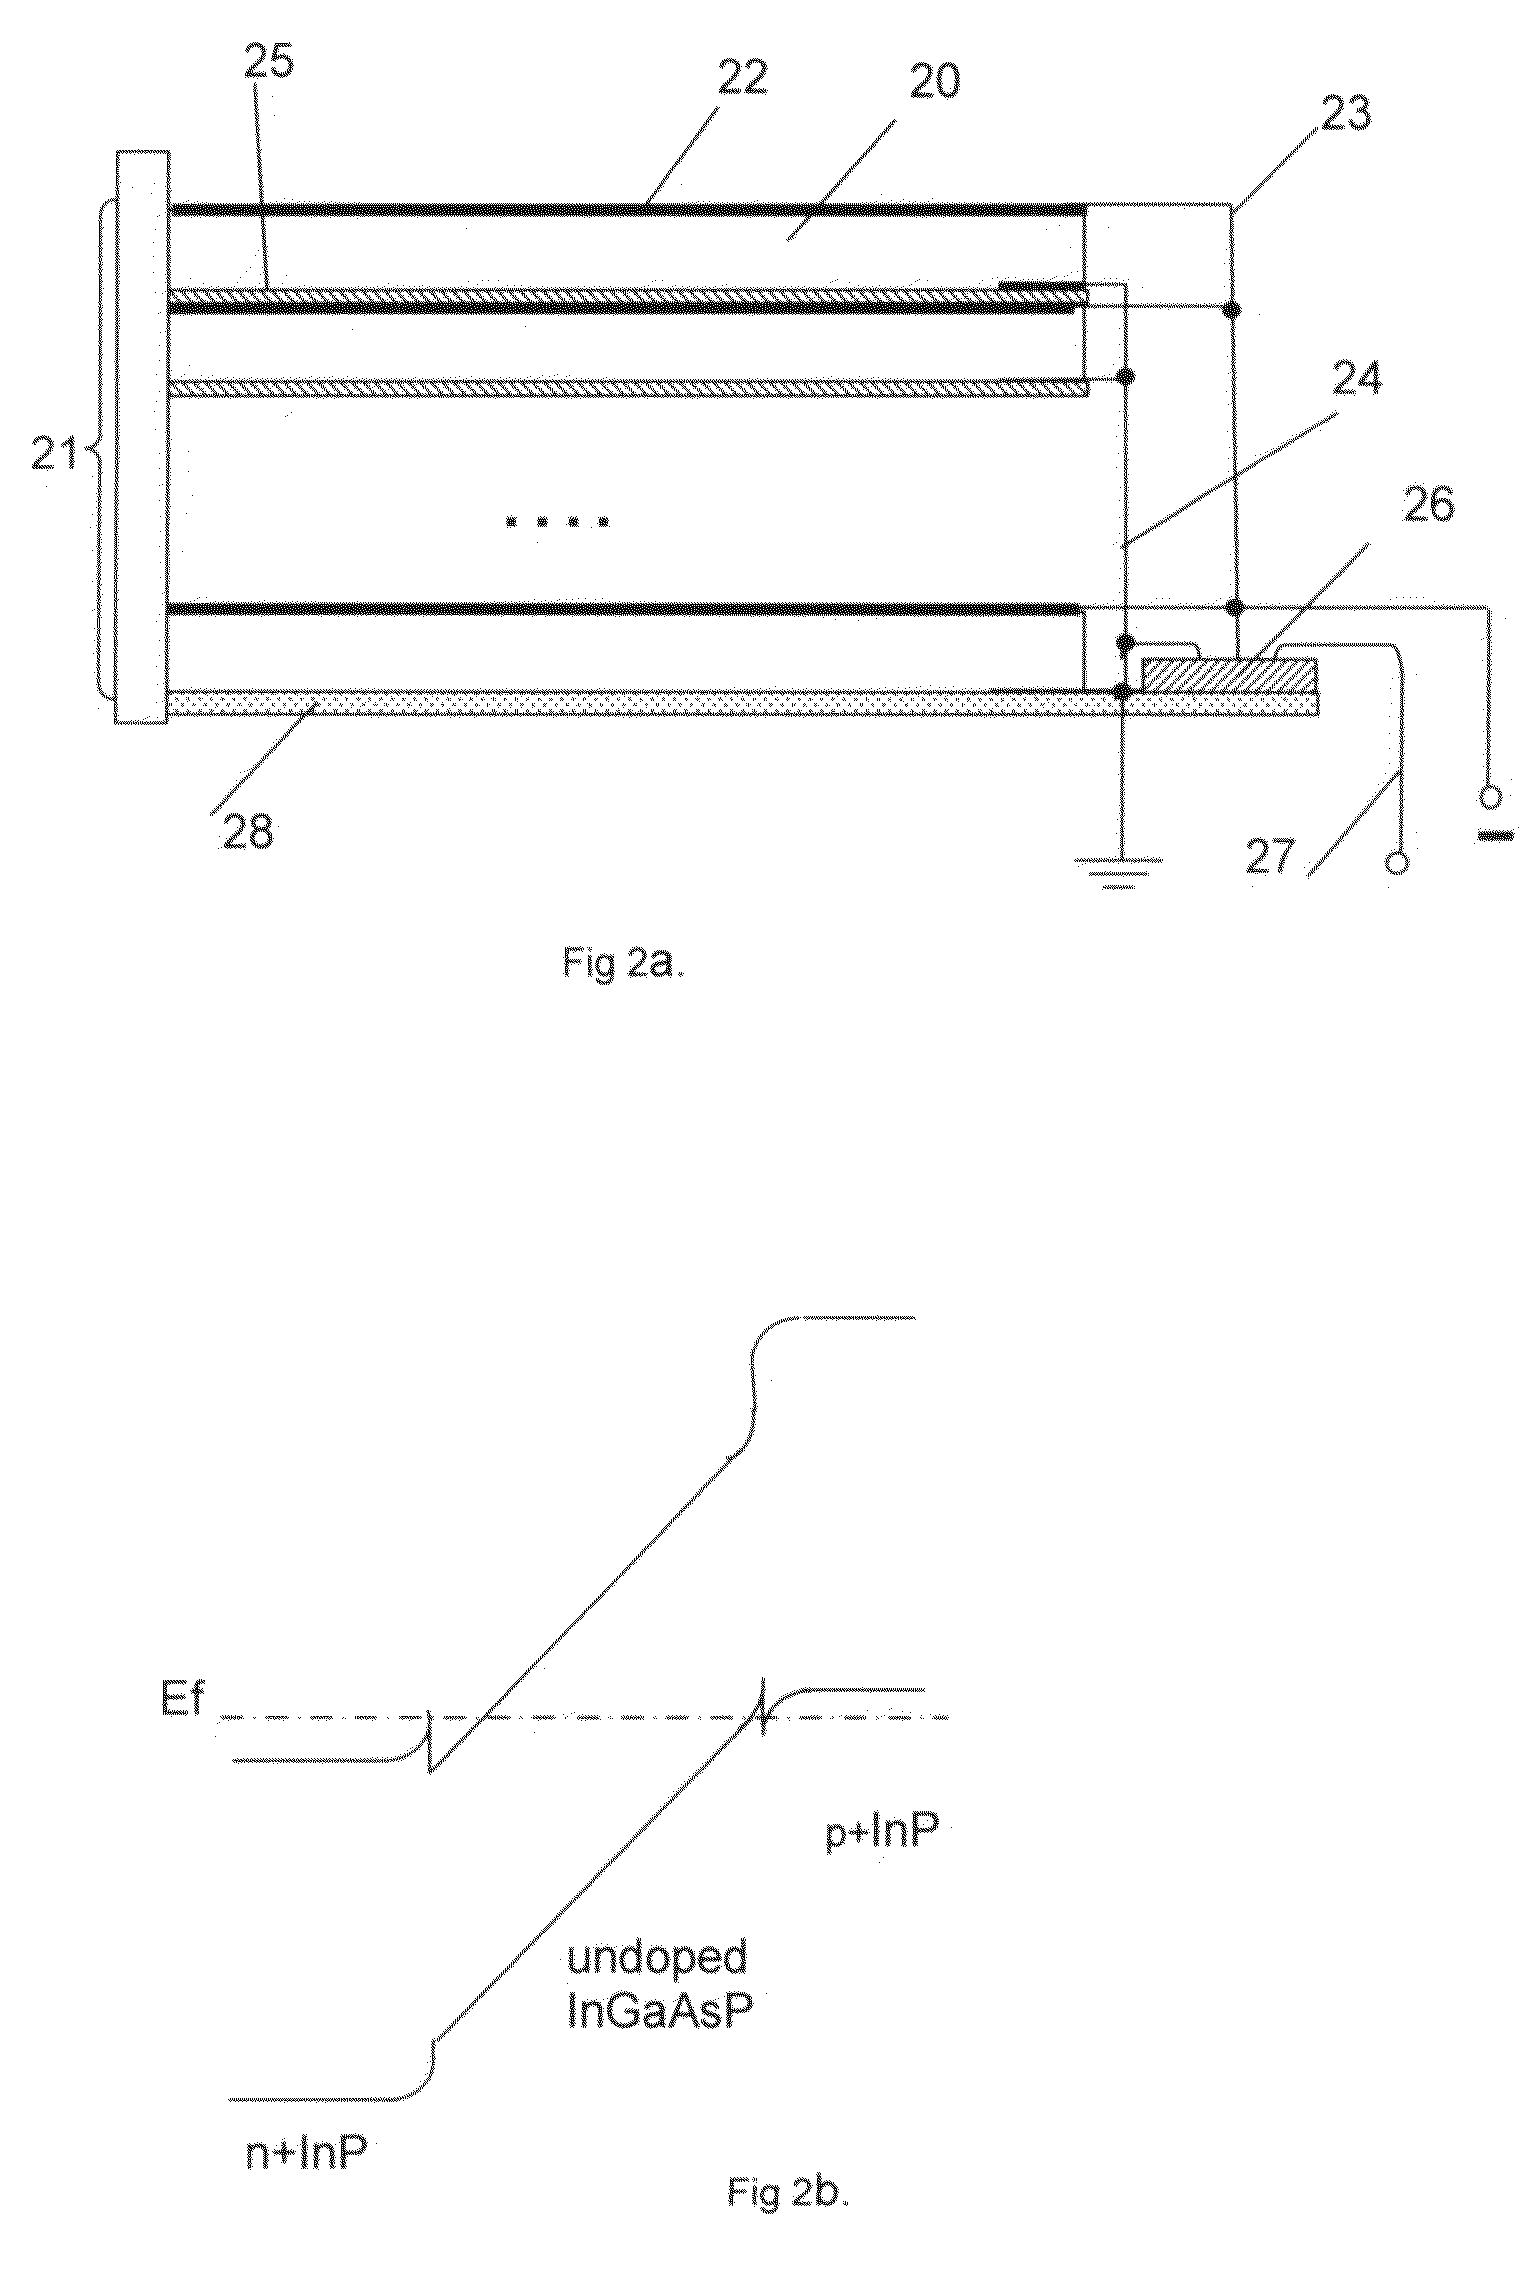 High-energy radiation scintillation detector comprising multiple semiconductor slabs